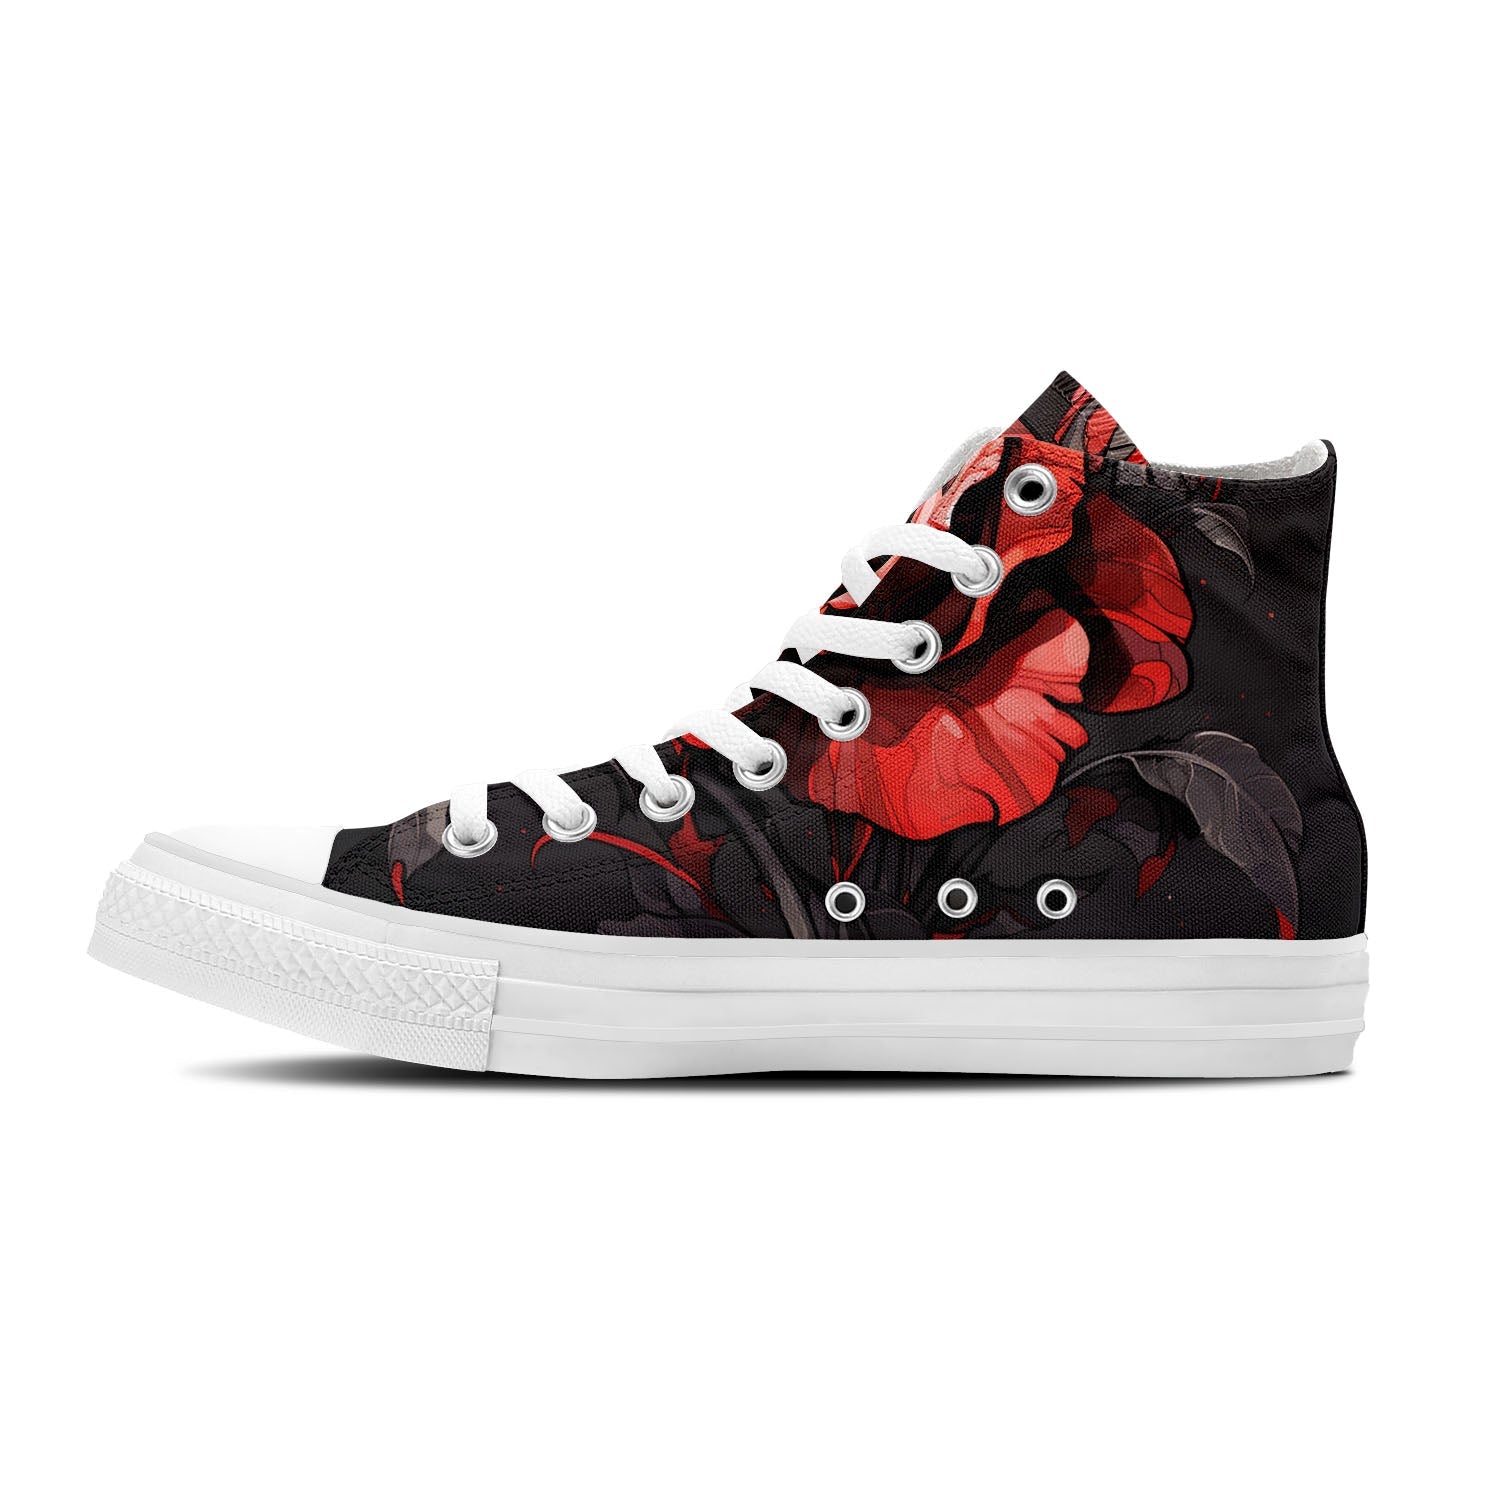 Crimson Shadows: Embrace the Dark Elegance of Red Roses in Our Mid-Top Canvas Shoes